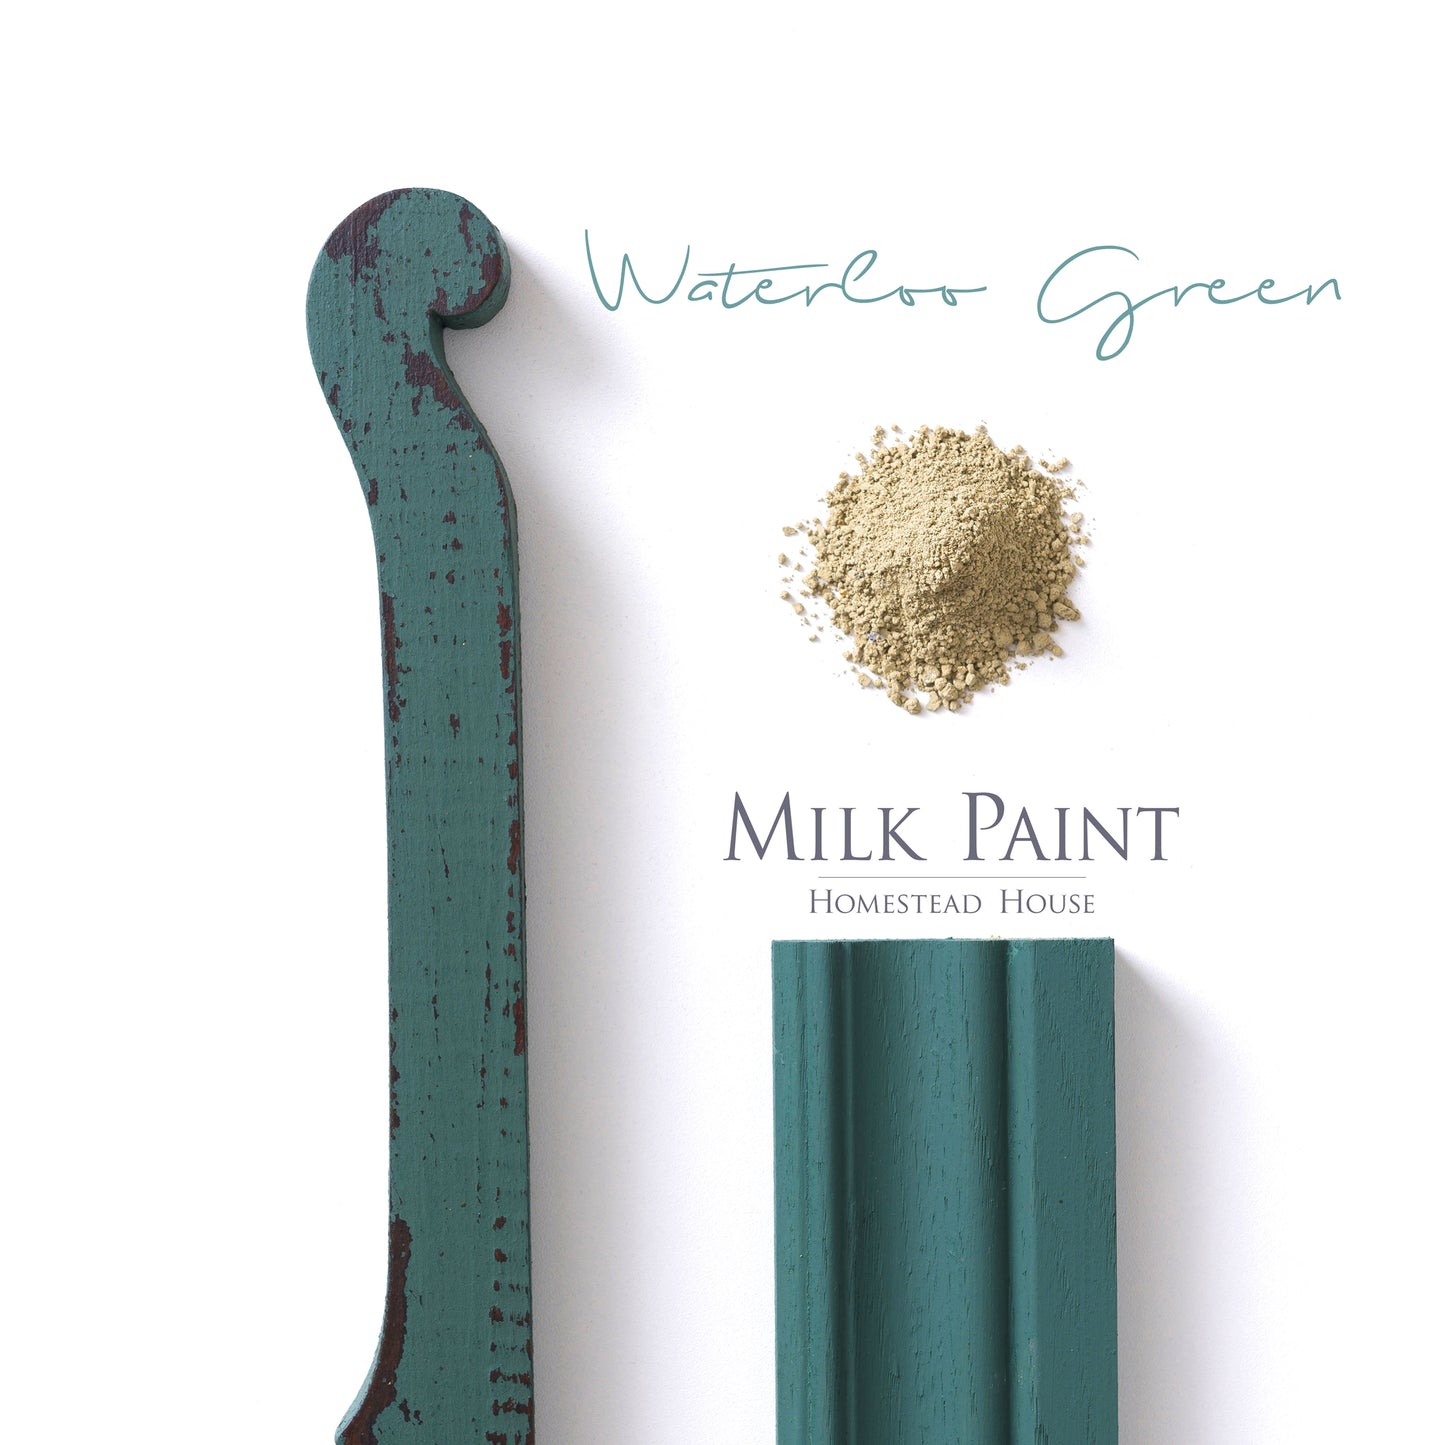 Milk Paint from Homestead House in Waterloo Green, A muted emerald green that has depth.  |  homesteadhouse.ca